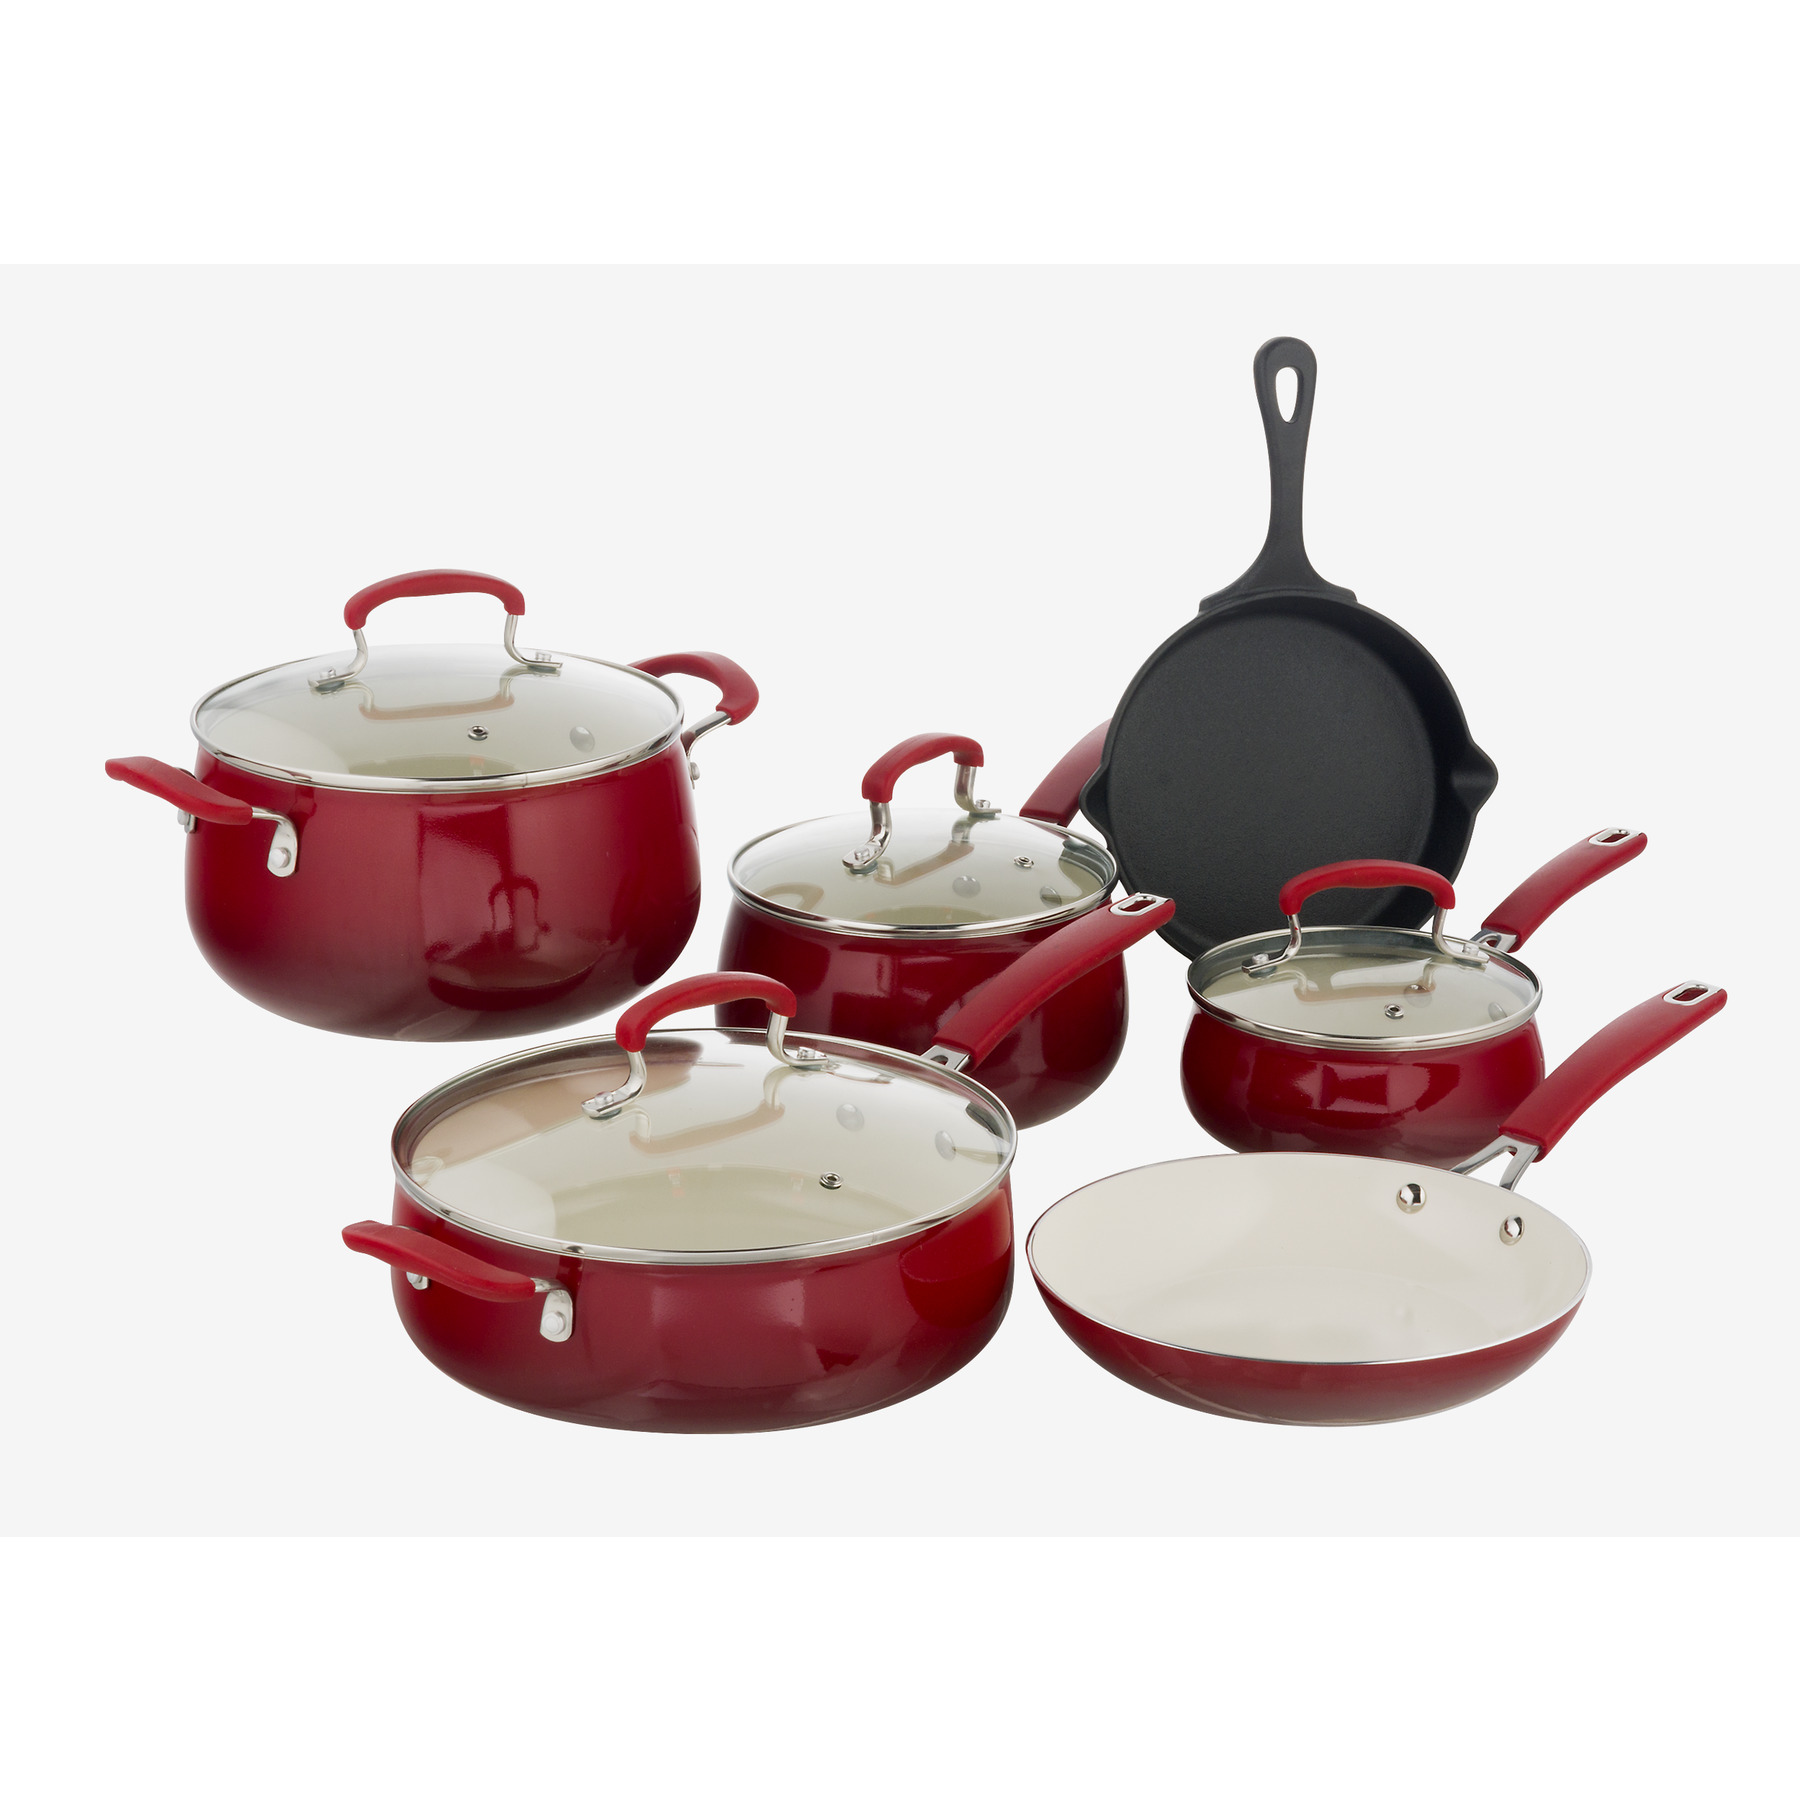 The Pioneer Woman Classic Belly 10 Piece Ceramic Non-stick and Cast Iron Cookware Set, Red - image 5 of 9